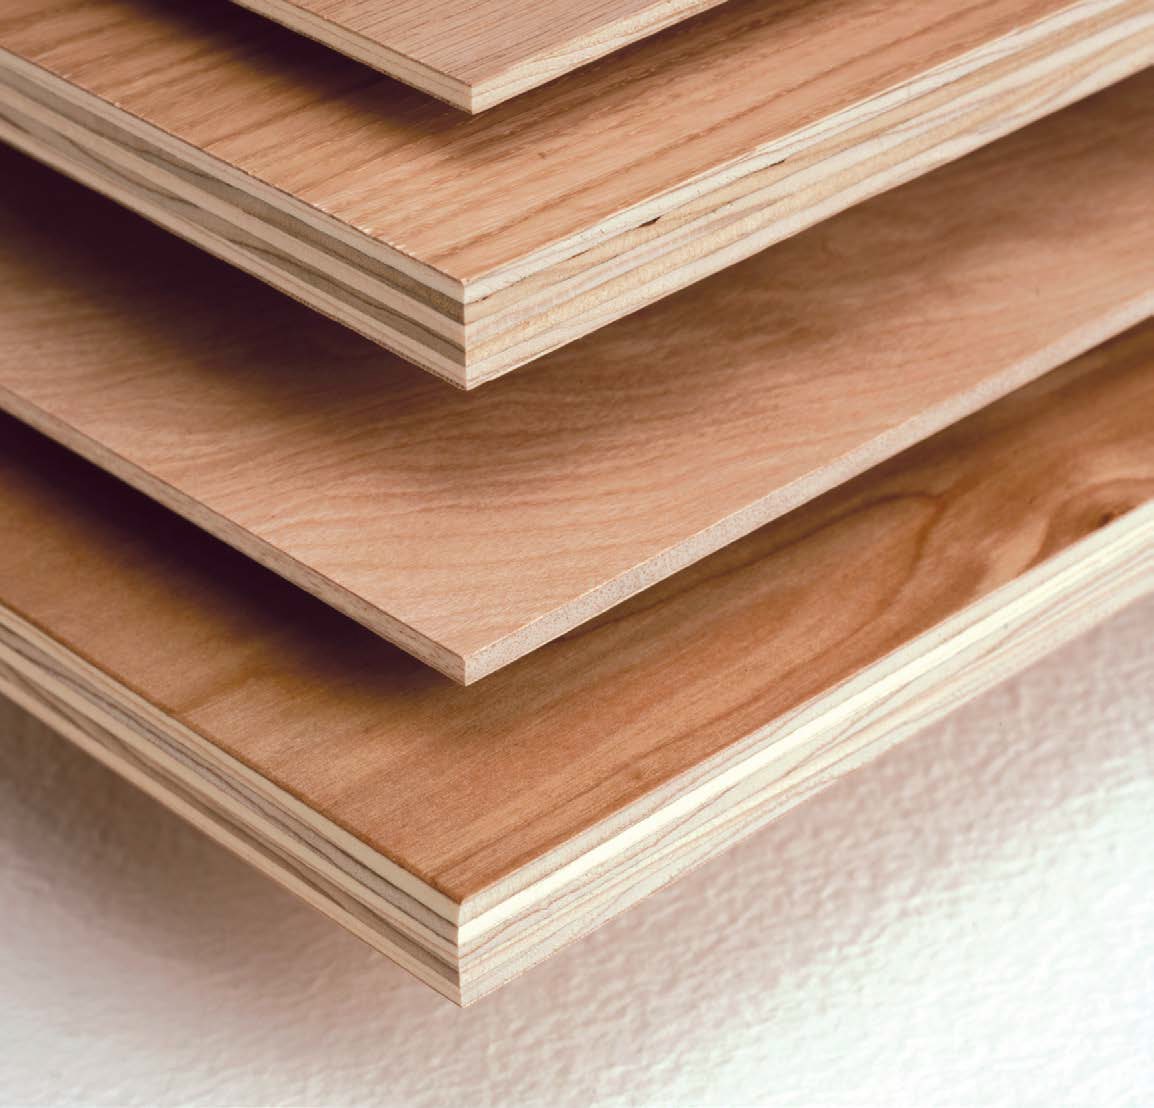 Plywood For Cabinets, What Type Of Plywood Is Best For Cabinets